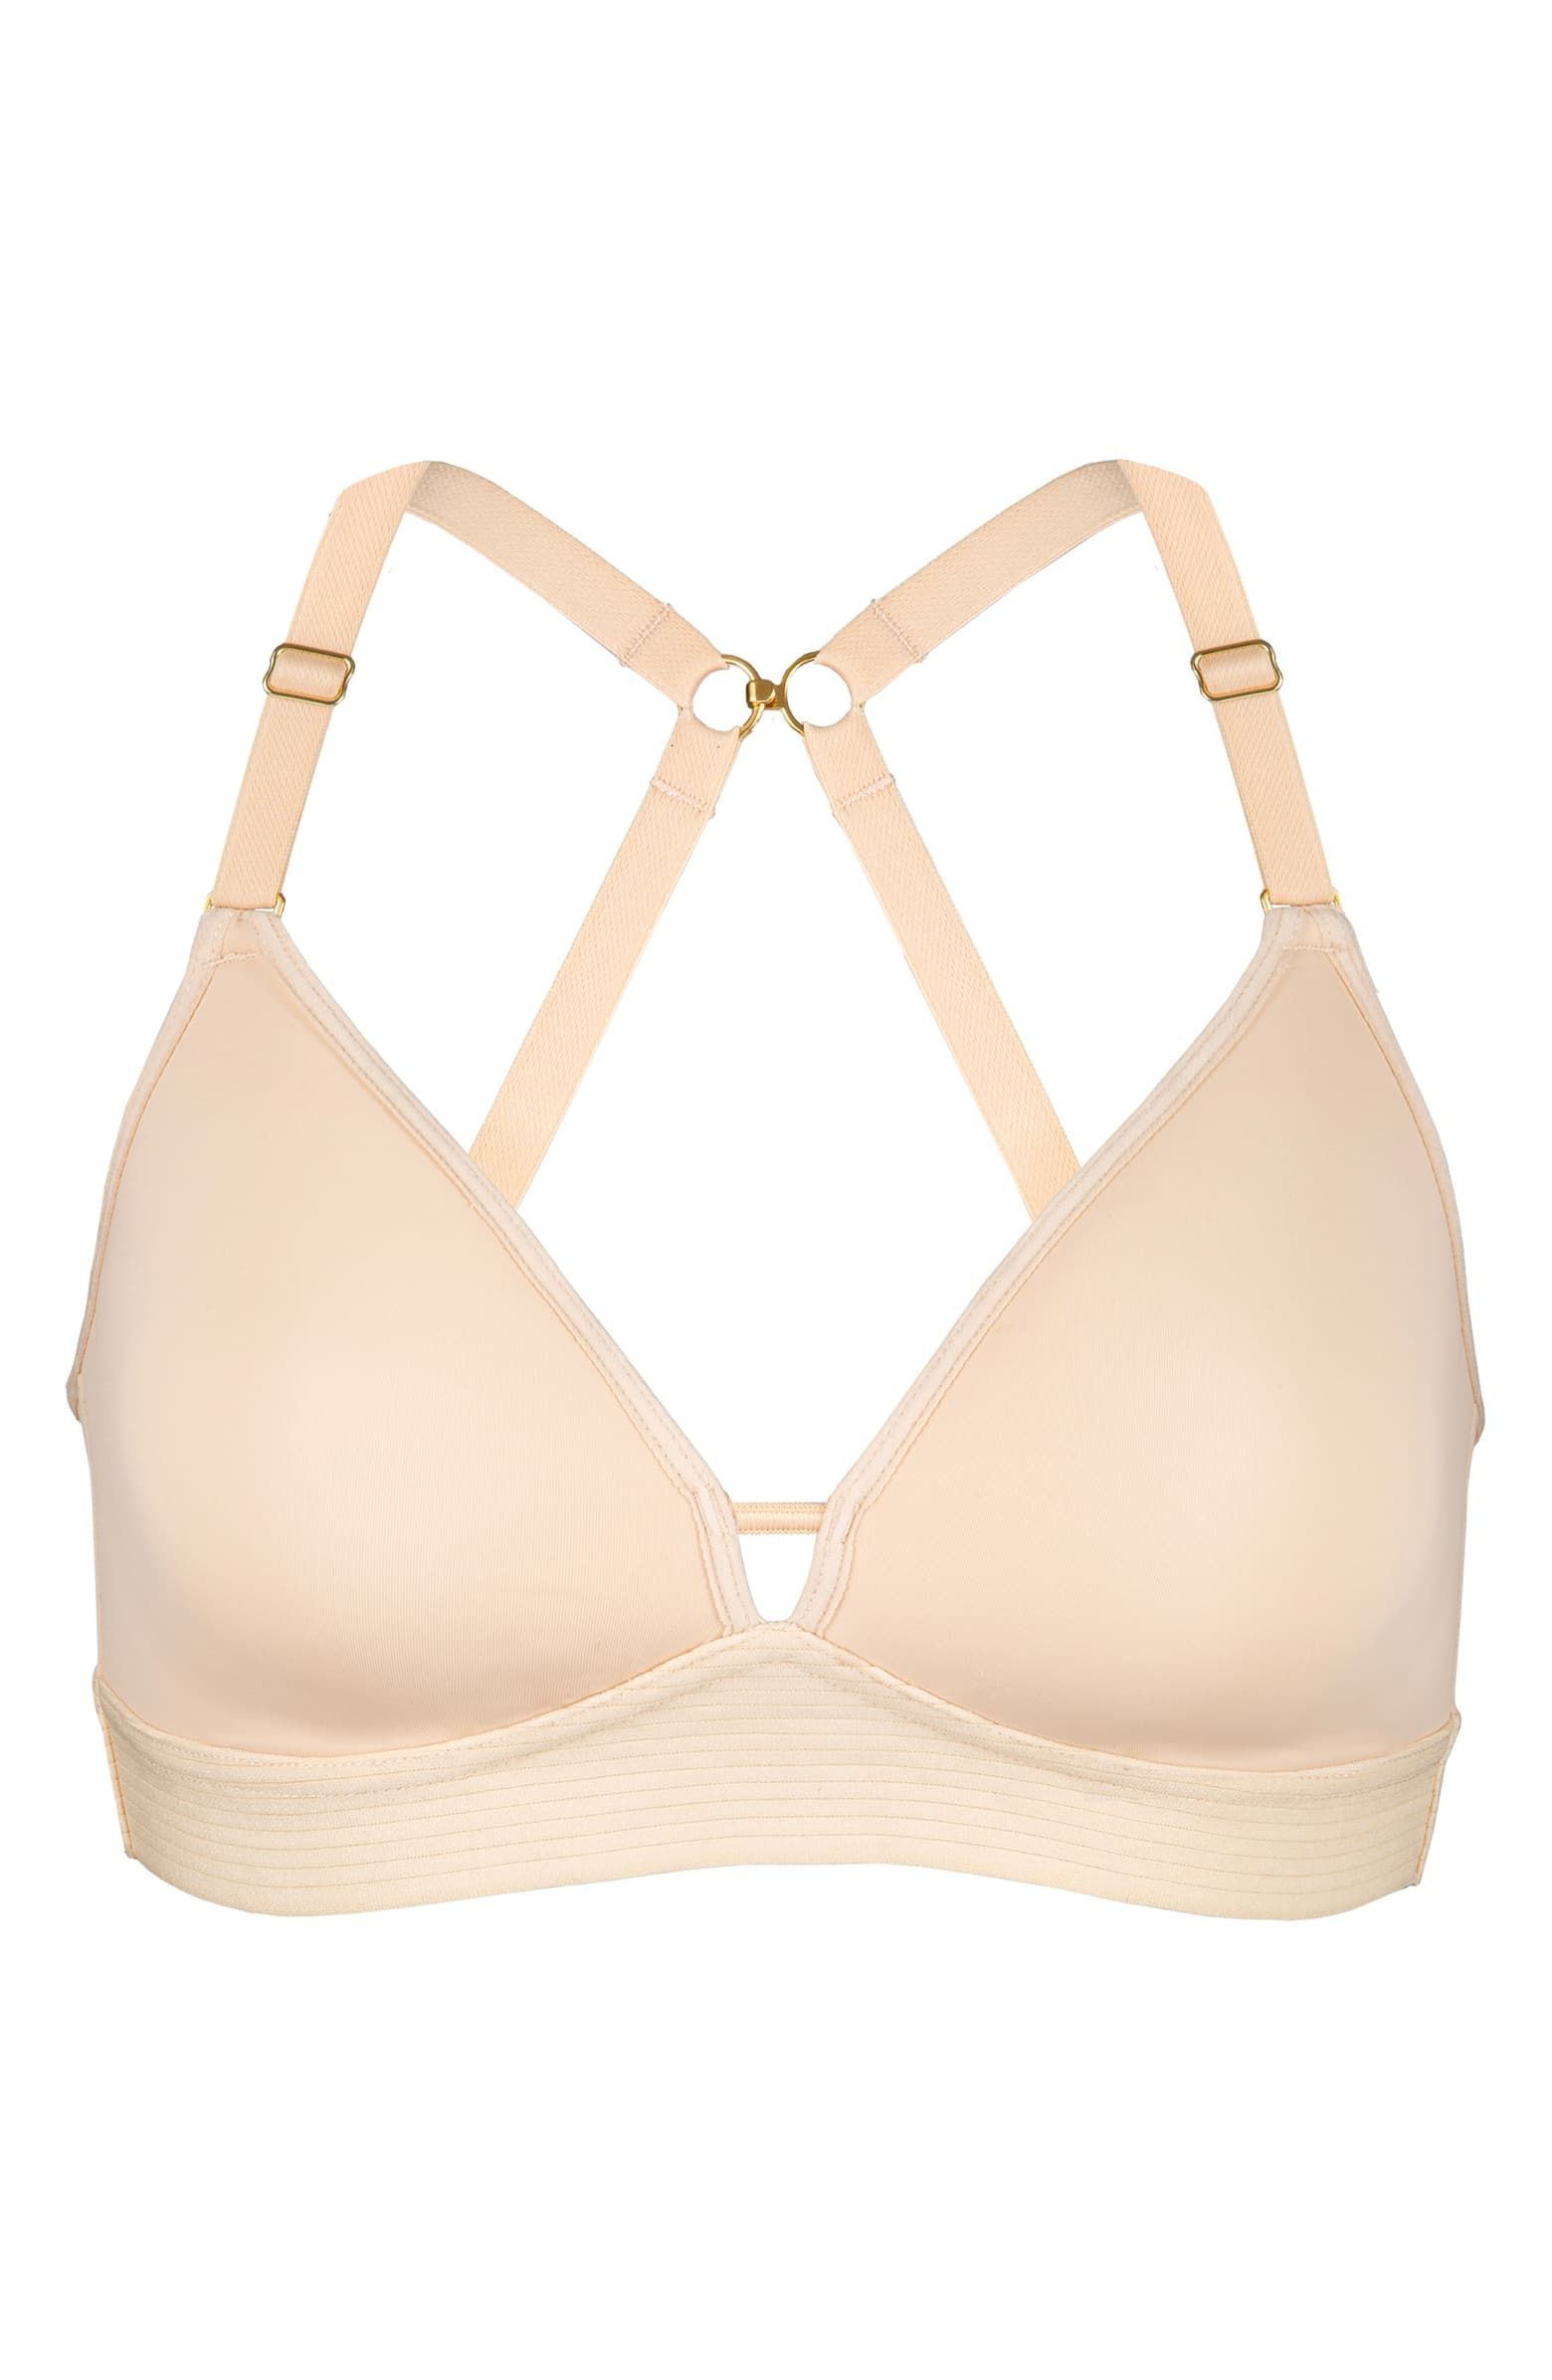 comfortable bras without underwire